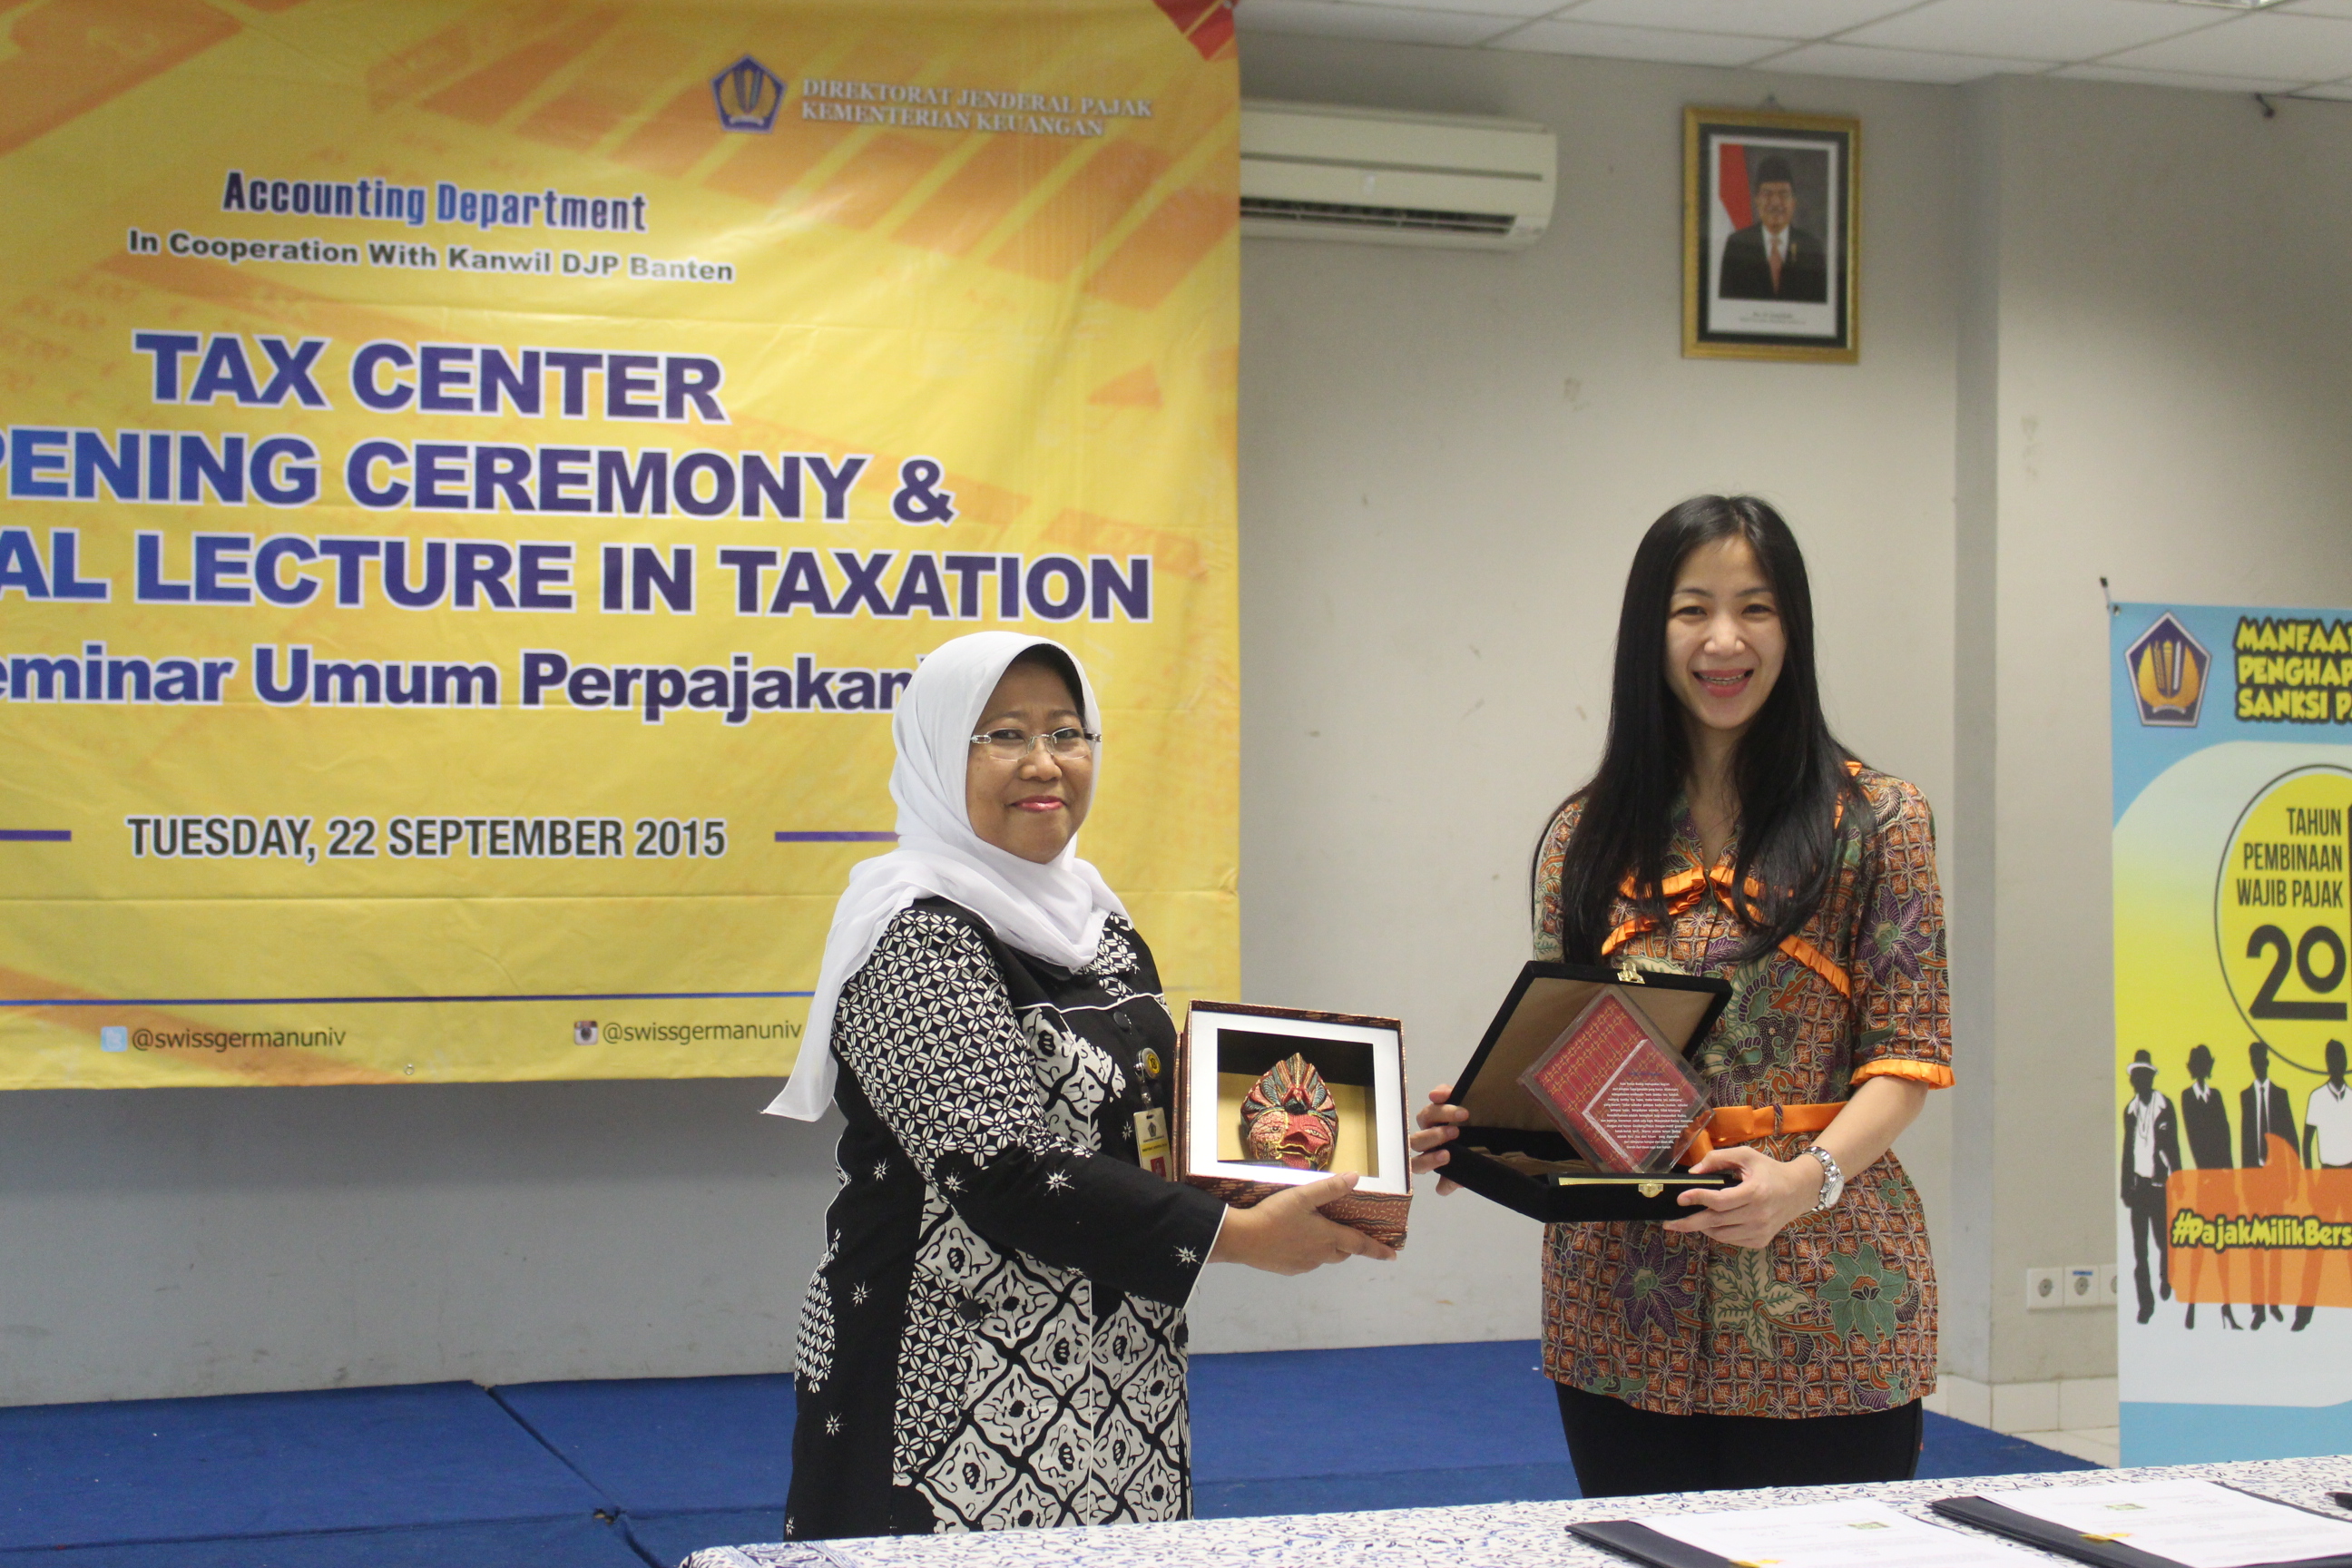 OPENING CEREMONY of SGU TAX CENTER